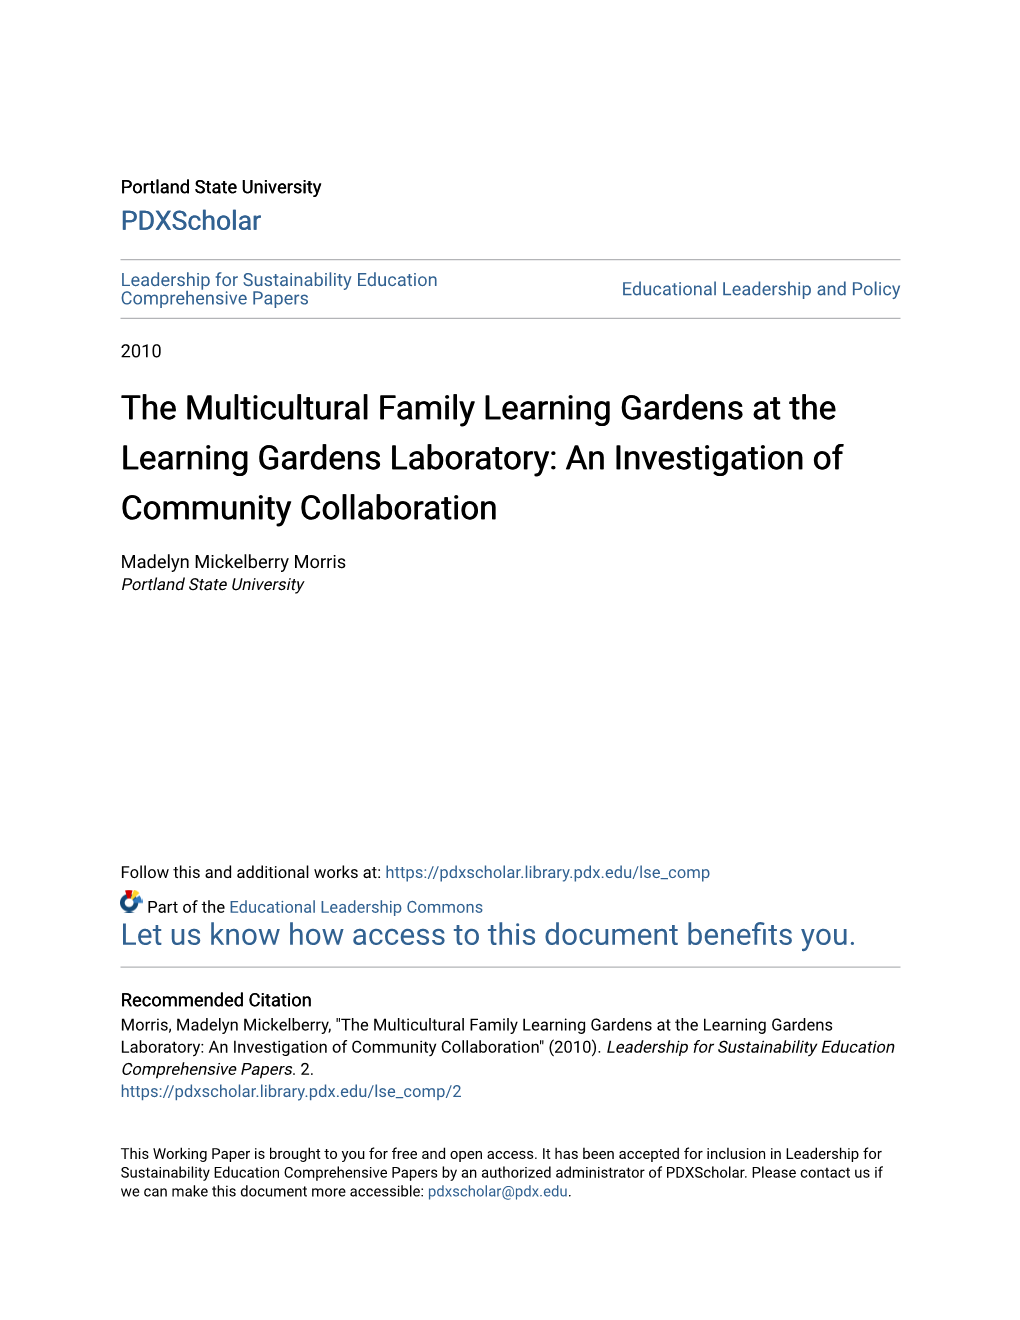 The Multicultural Family Learning Gardens at the Learning Gardens Laboratory: an Investigation of Community Collaboration